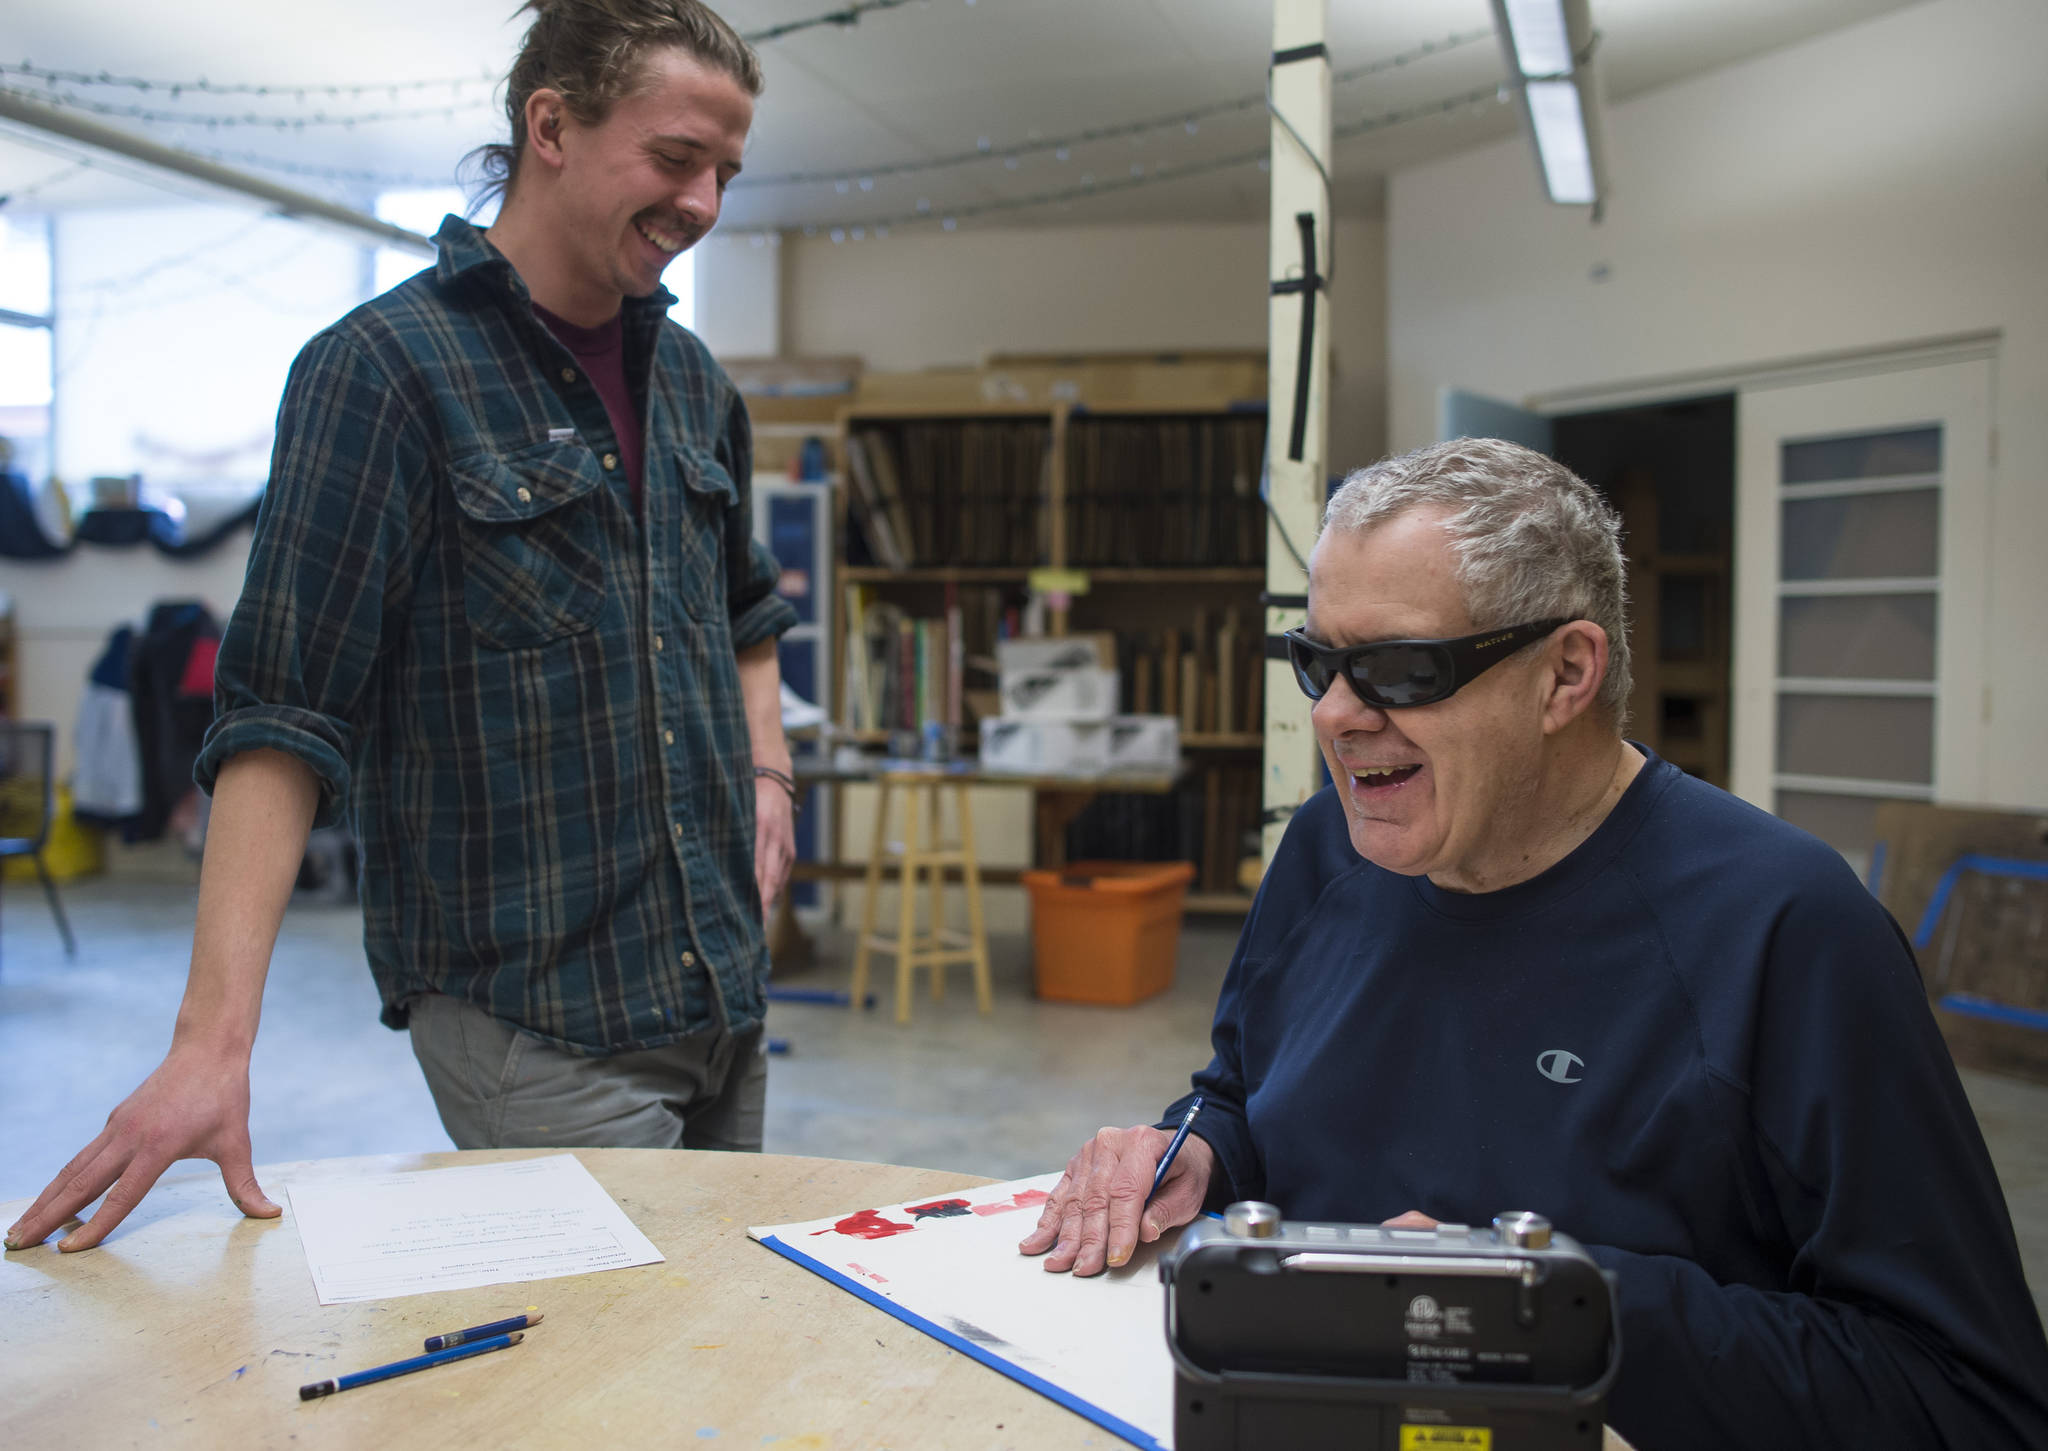 Mike Godkin, a client at REACH Inc., is helped by art studio assistant Matt Hansen during an afternoon drawing class at The Canvas on Tuesday, March 27, 2018. REACH Inc. is celebrating their 40th Anniversary. Godkin, 58, has been with REACH since it started in 1977. (Michael Penn | Juneau Empire)